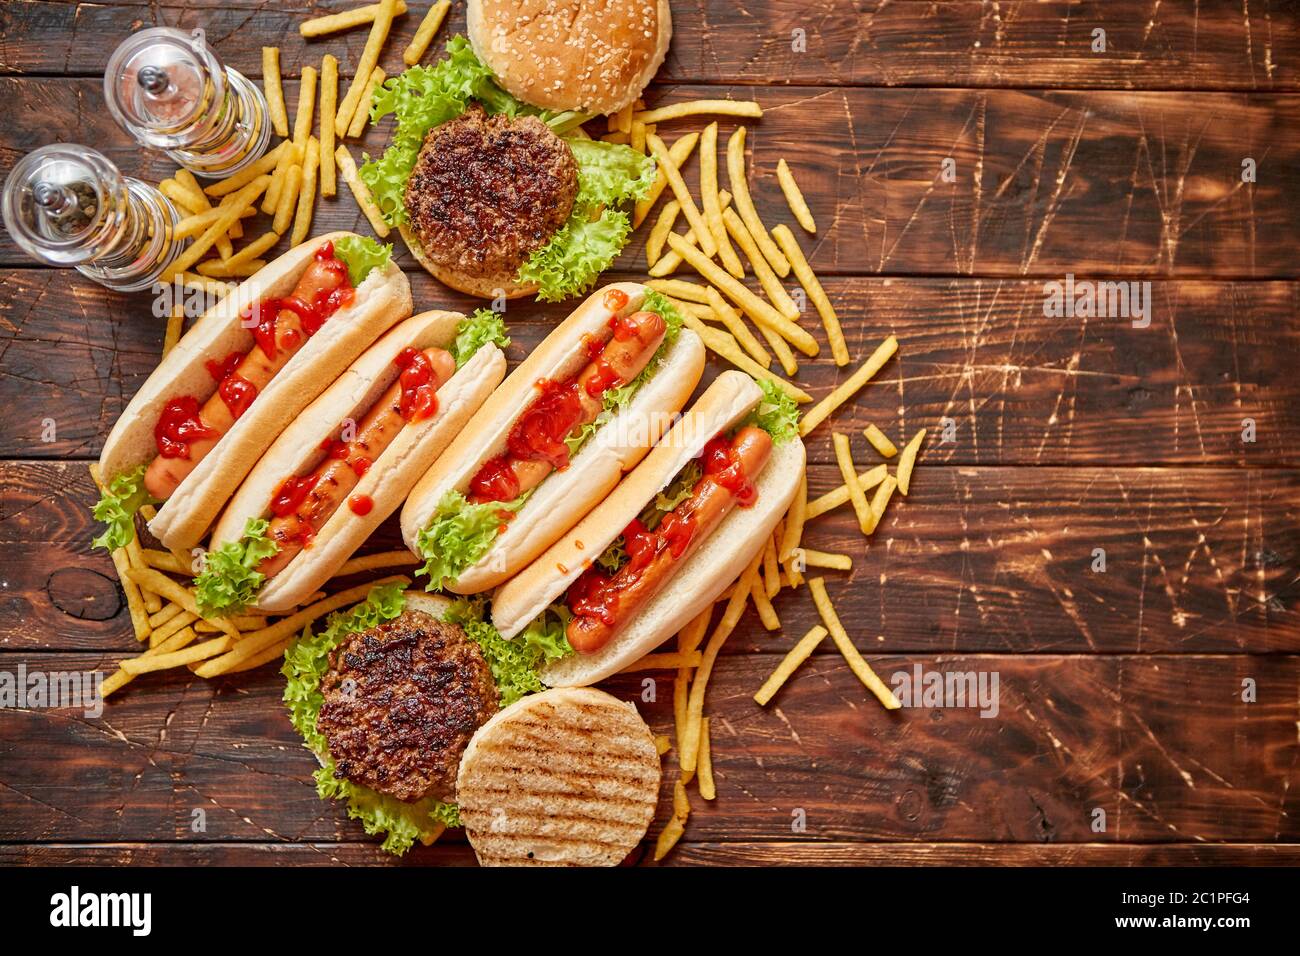 Fastfood assortment. Hamburgers and hot dogs placed on rusty wood table Stock Photo